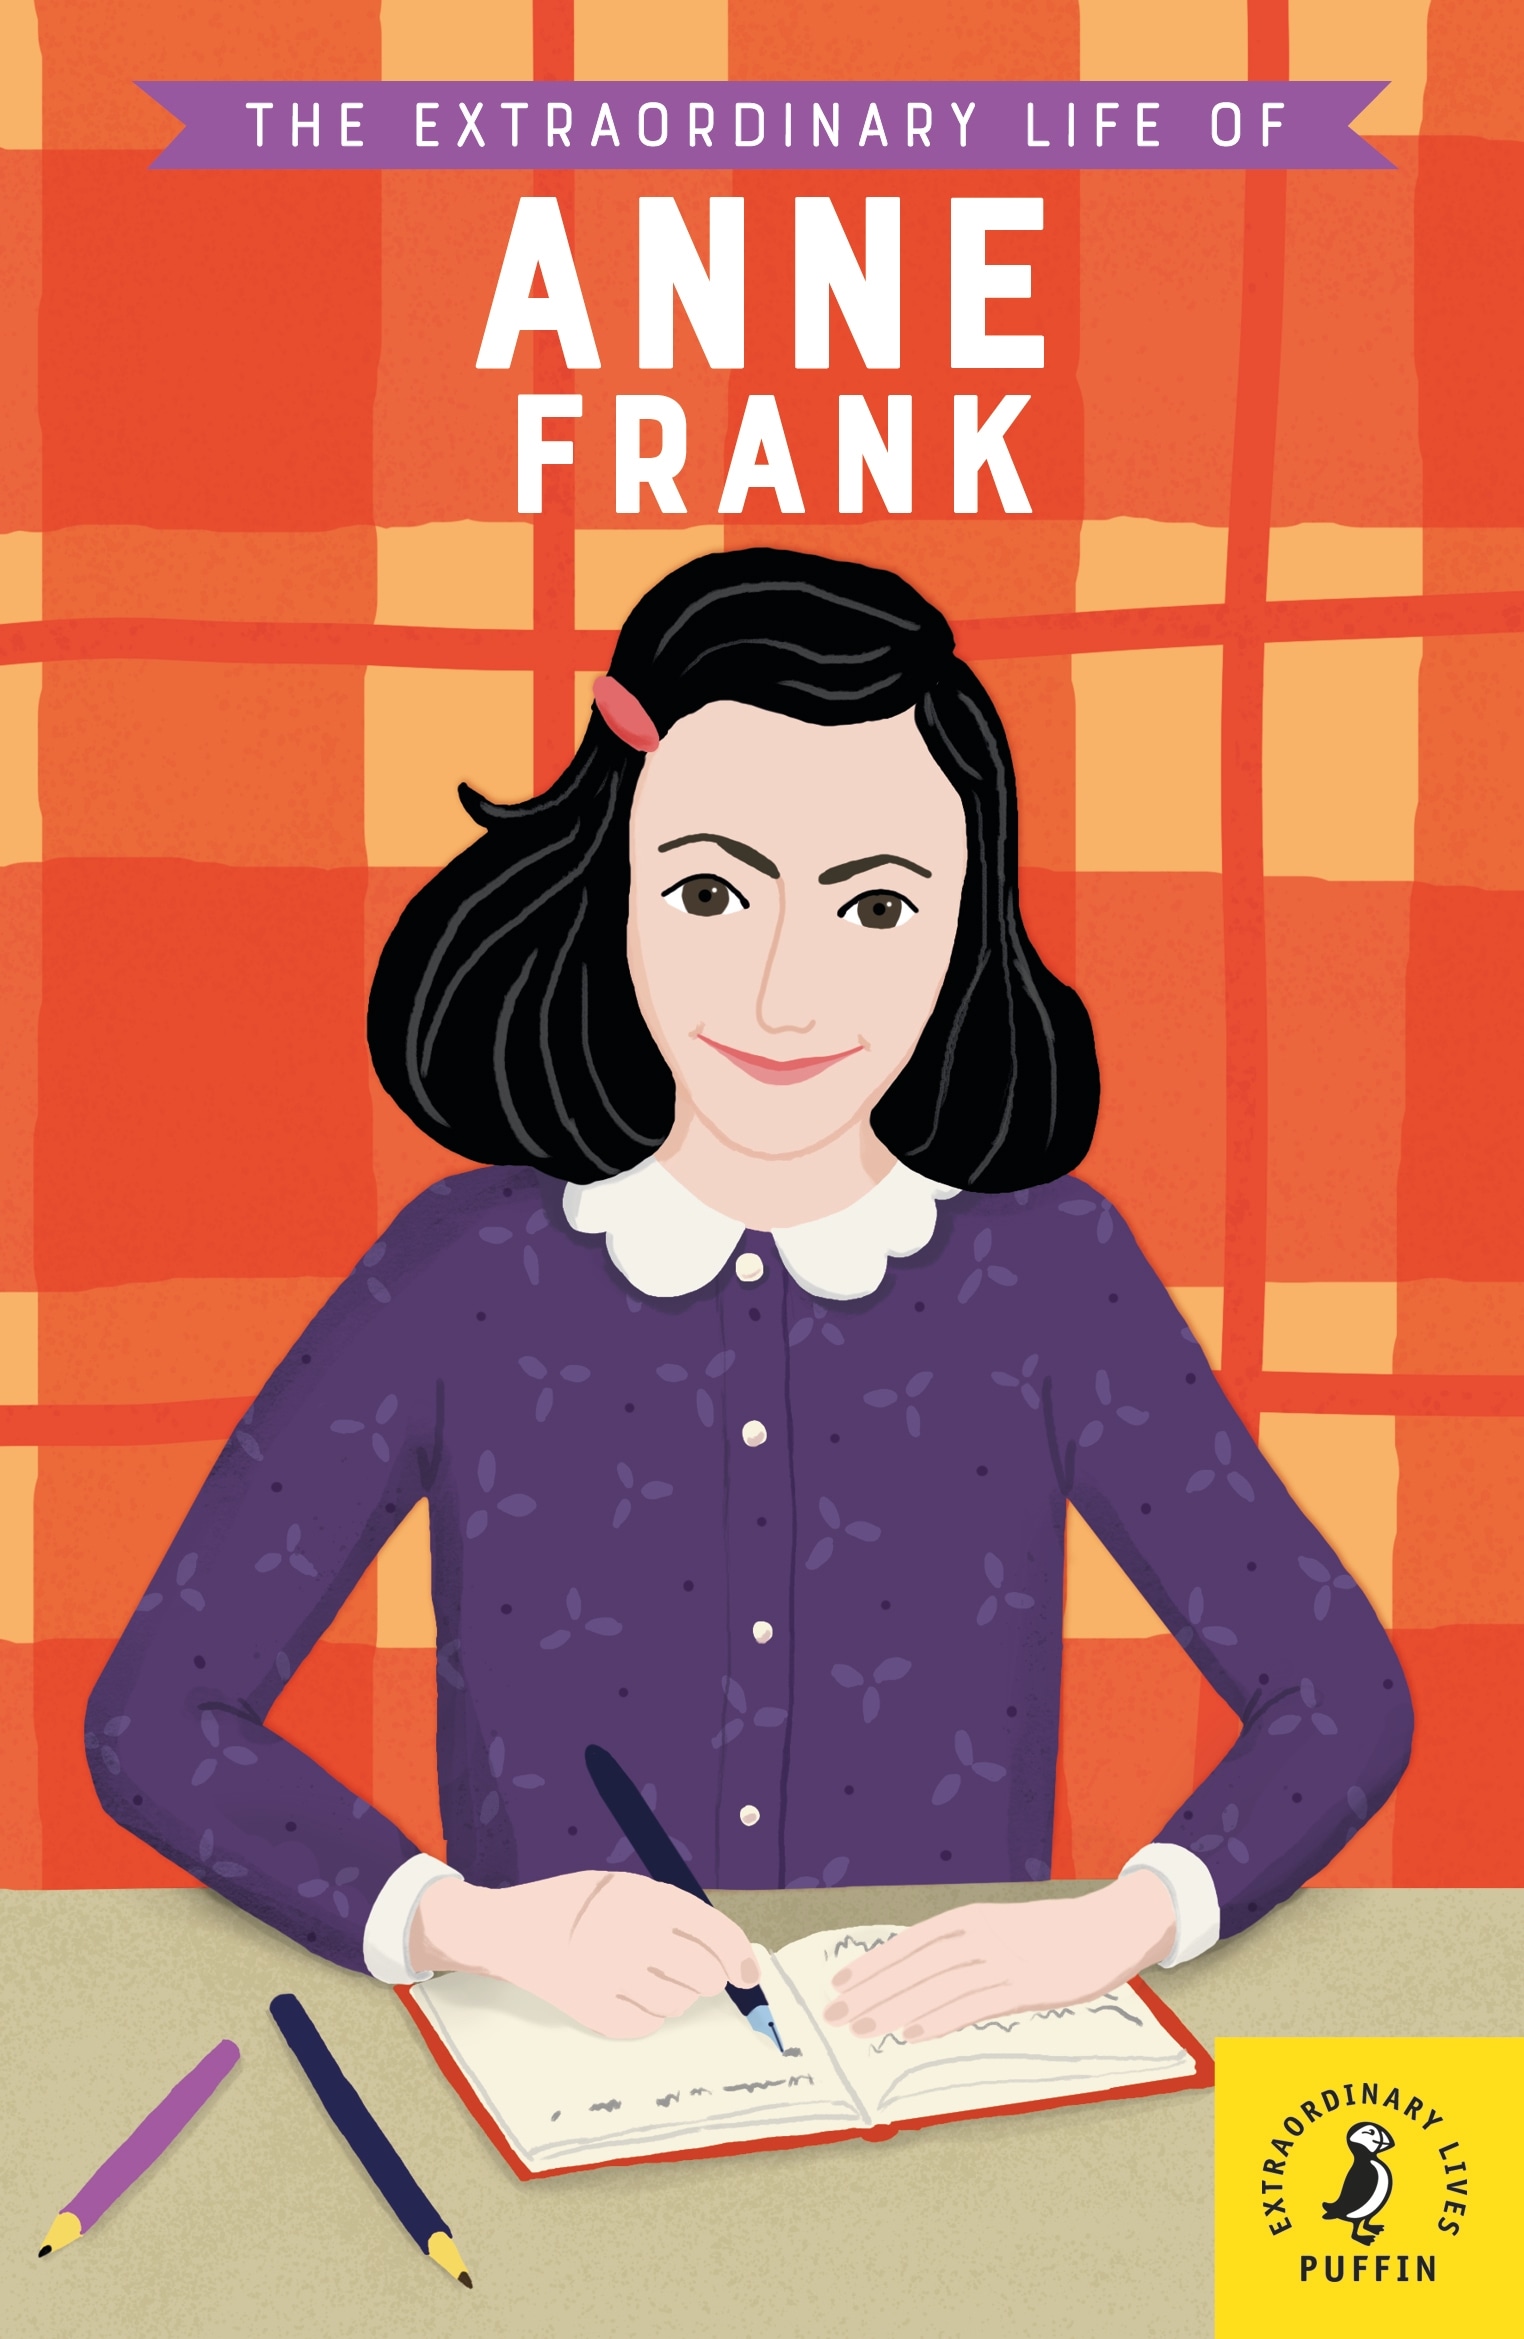 Book “The Extraordinary Life of Anne Frank” by Kate Scott — June 6, 2019